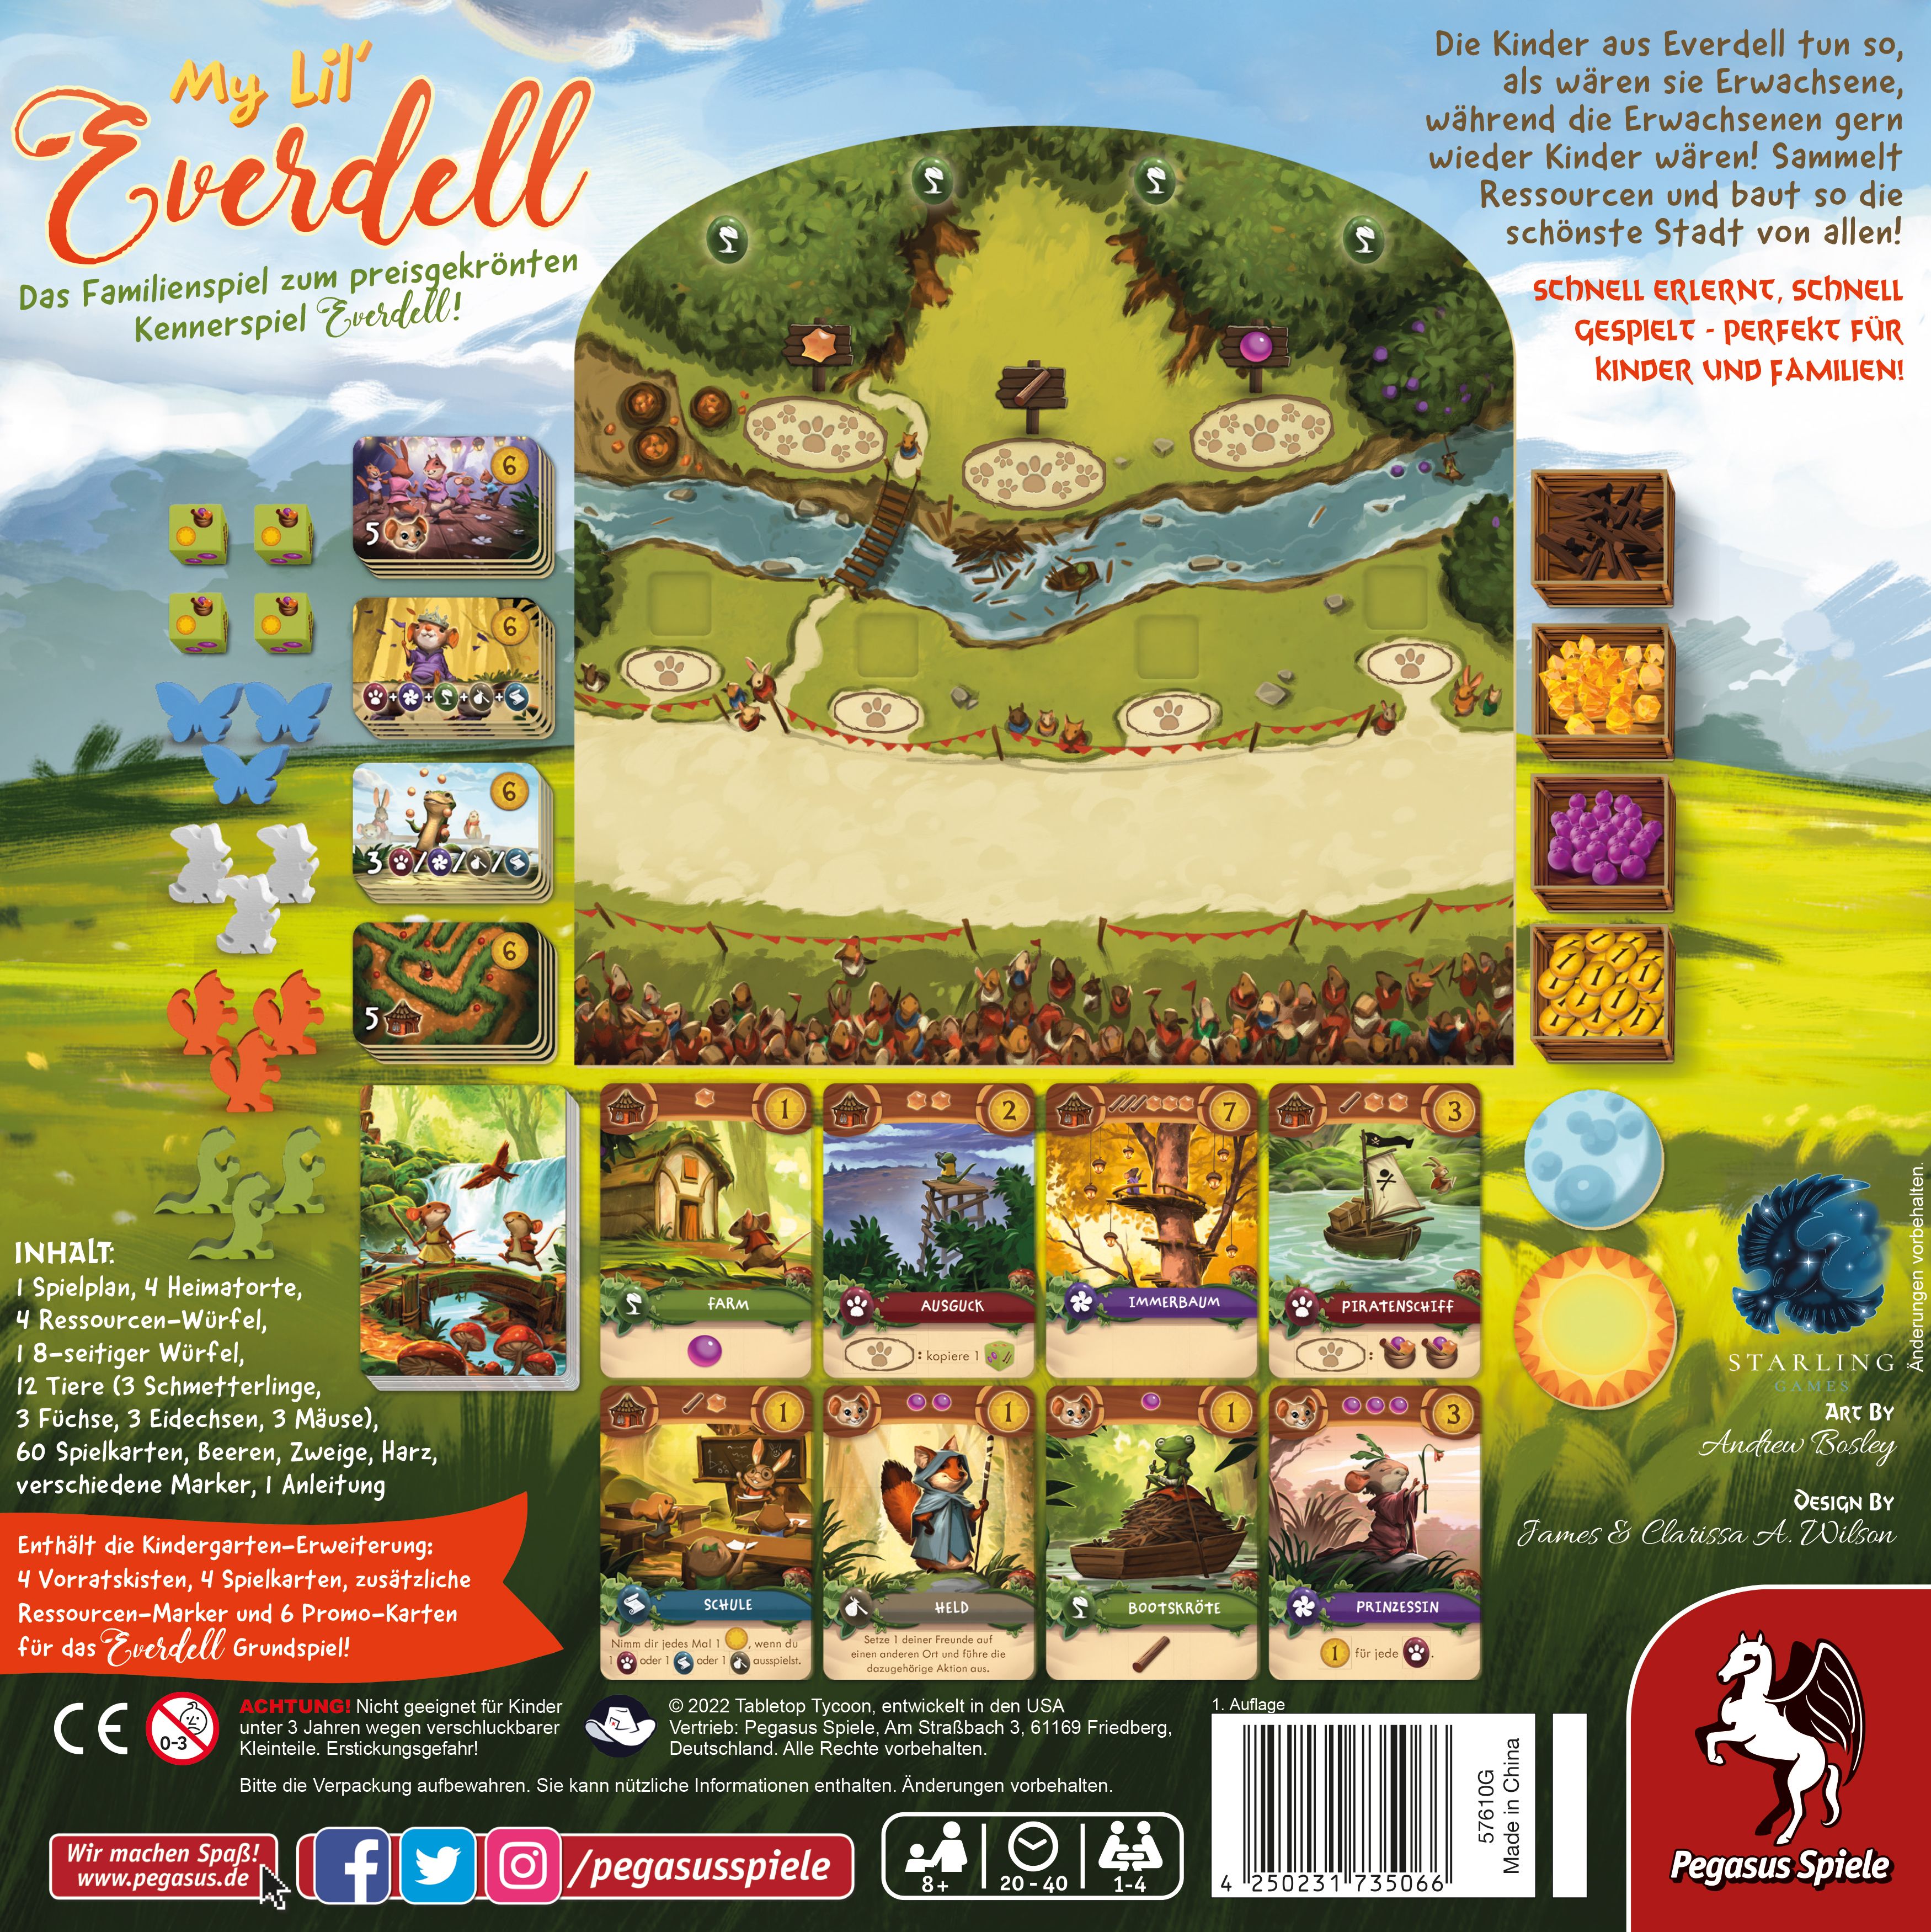 My Lil' Everdell | Image | BoardGameGeek